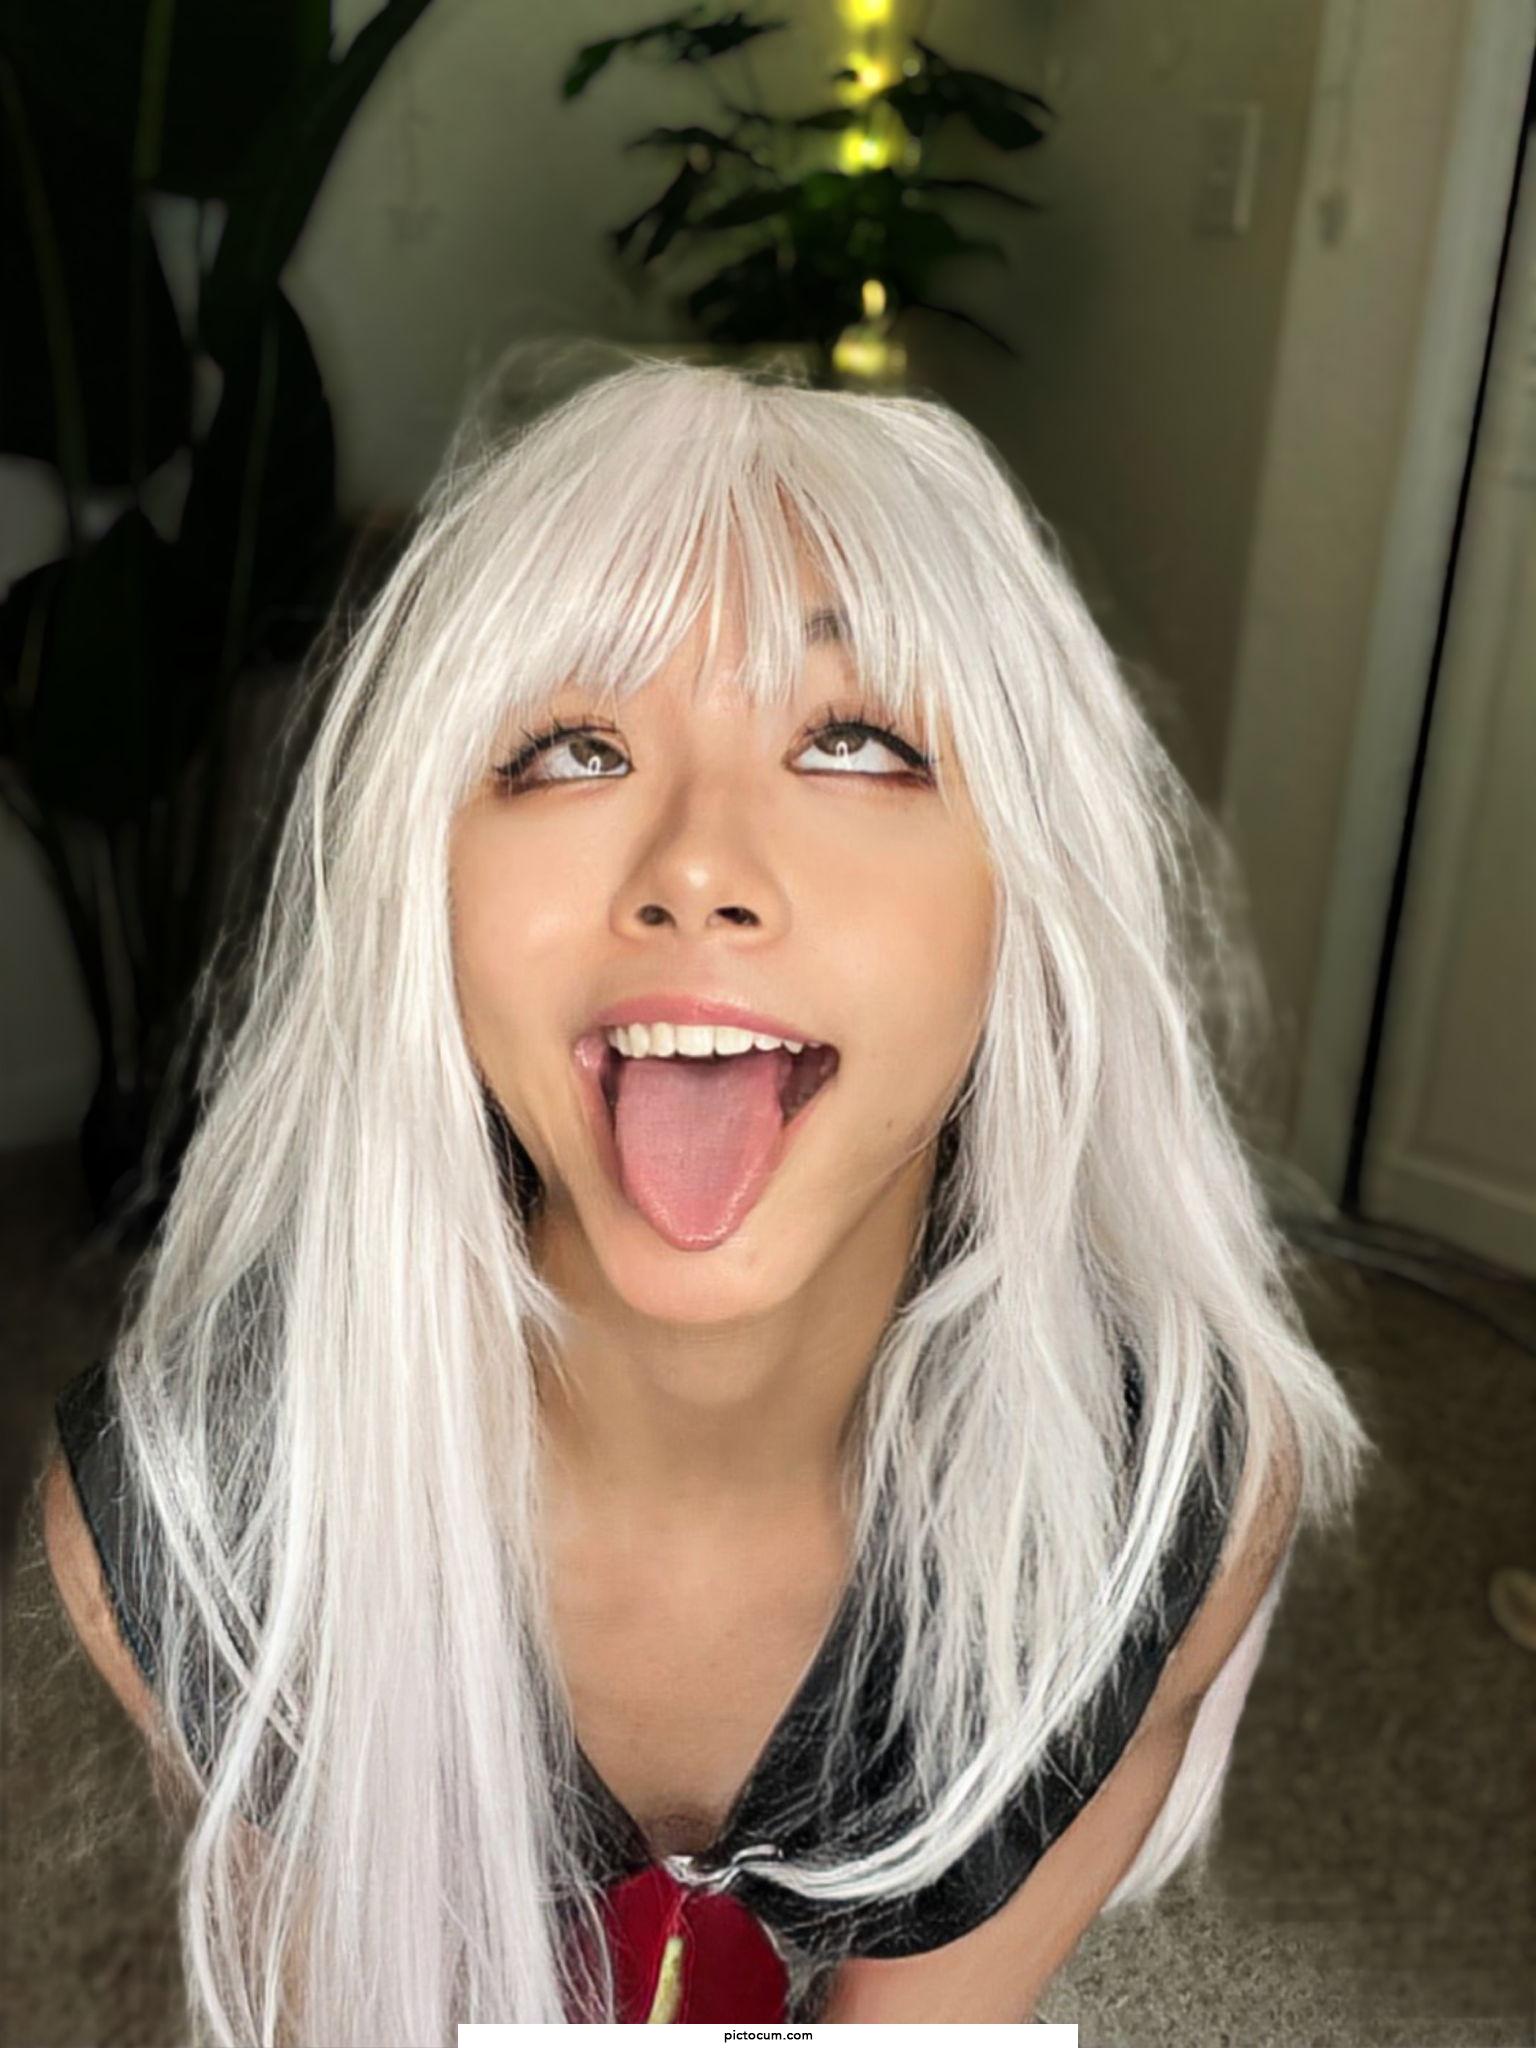 Some Ahegao silliness for you!